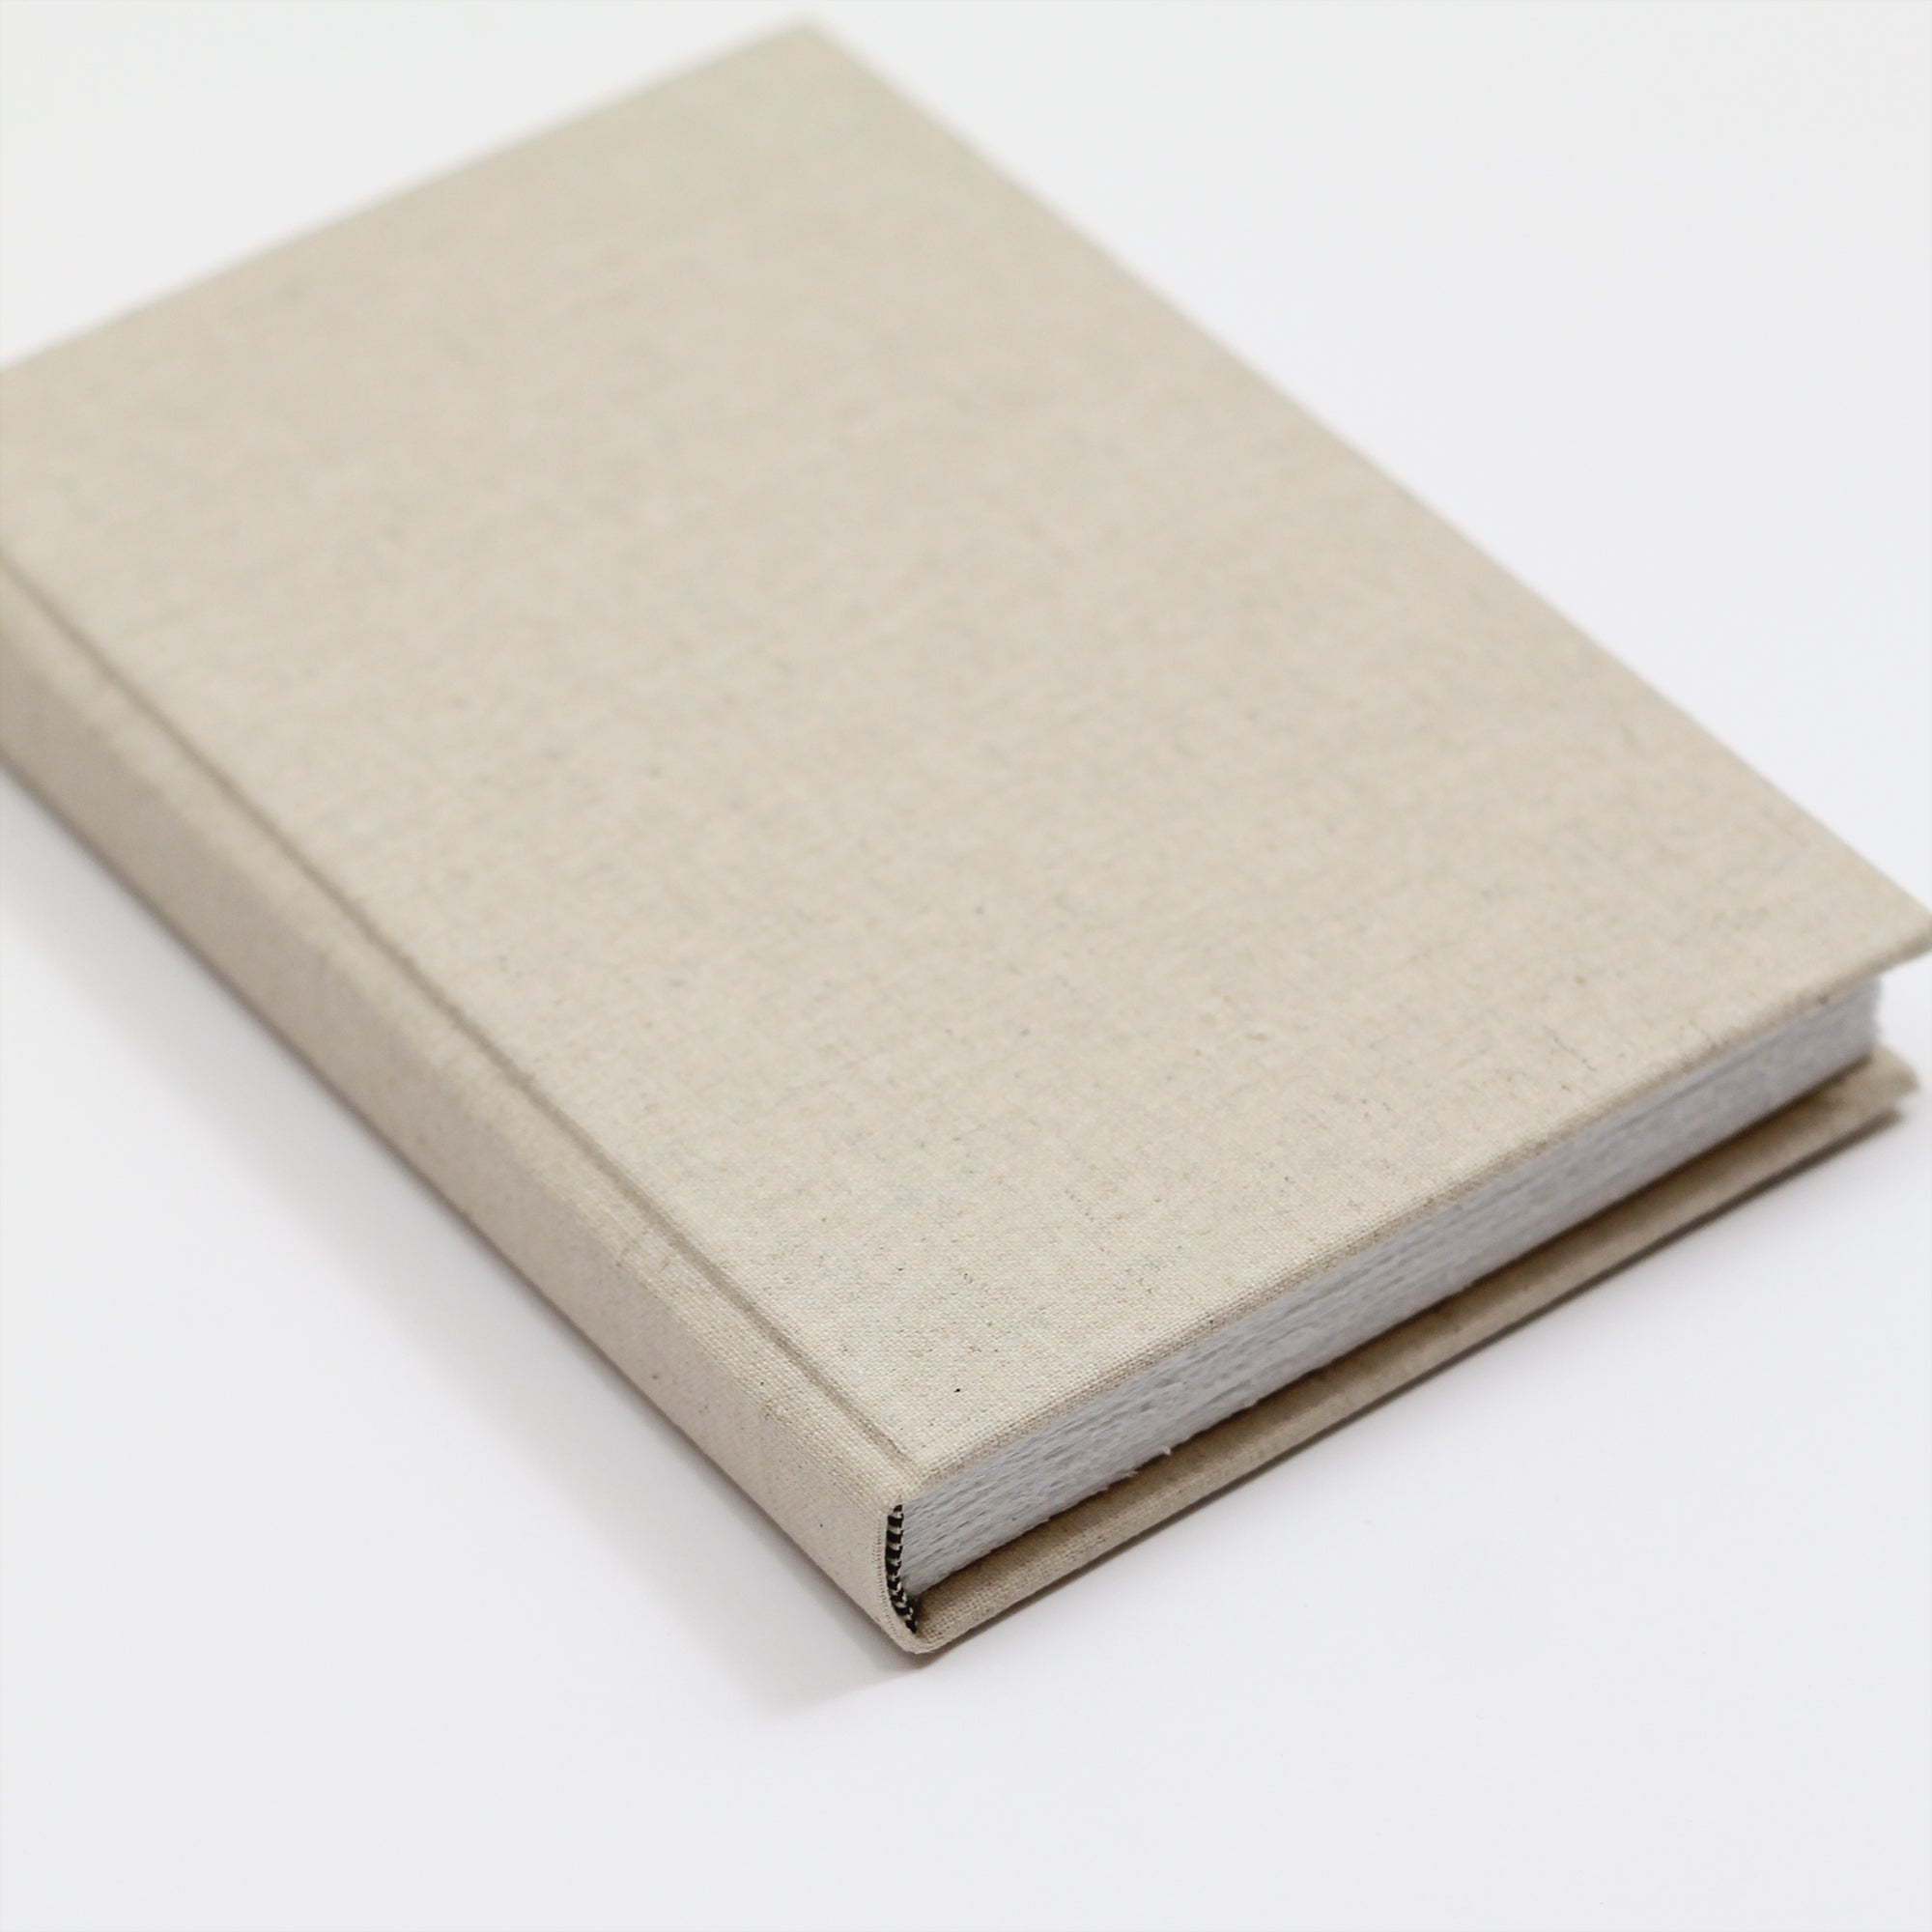 Medium Blank Page Journal With Natural Linen Cover - Rag & Bone Bindery